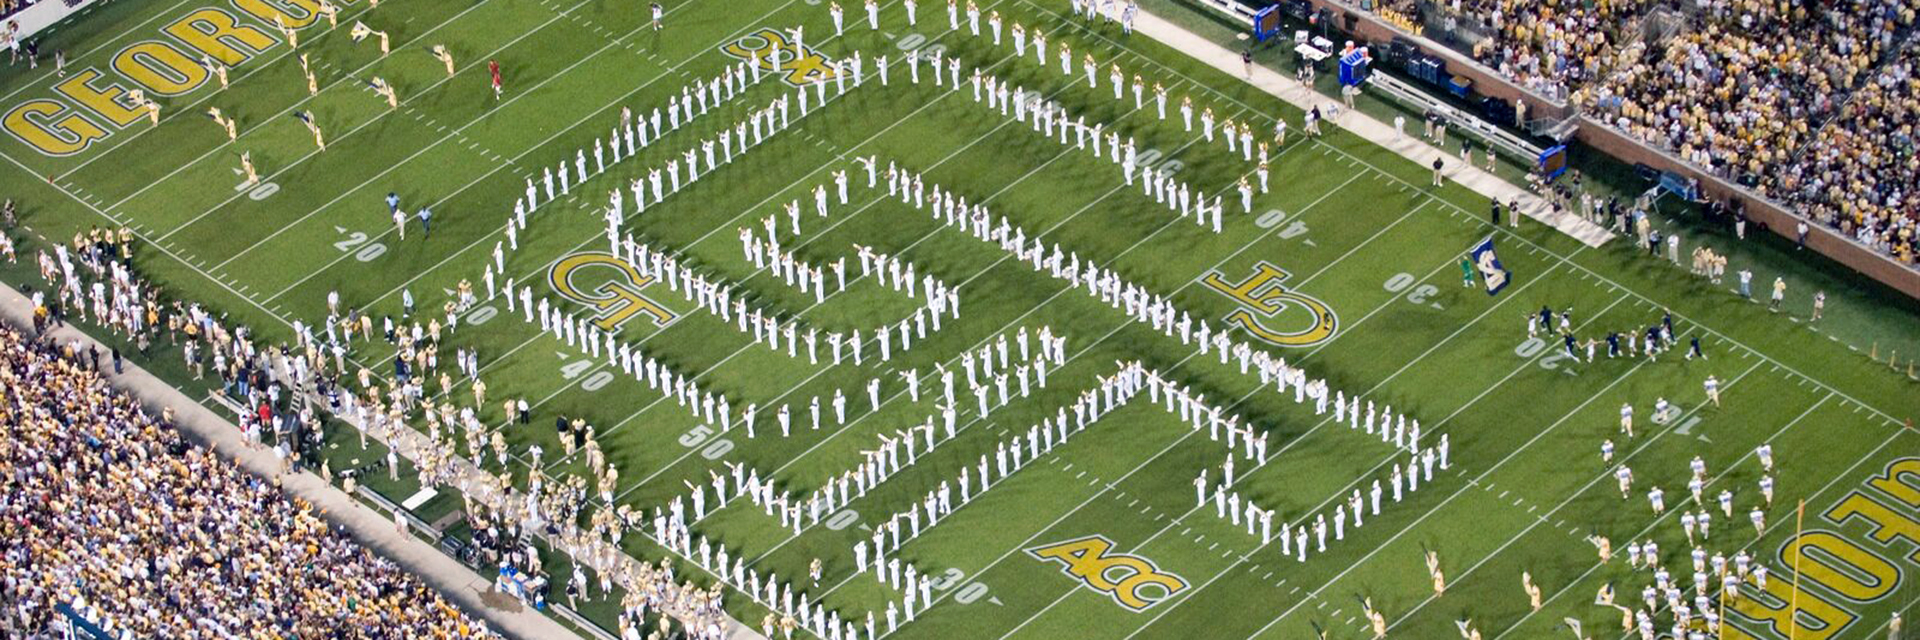 The Marching Band in formation at a football game.